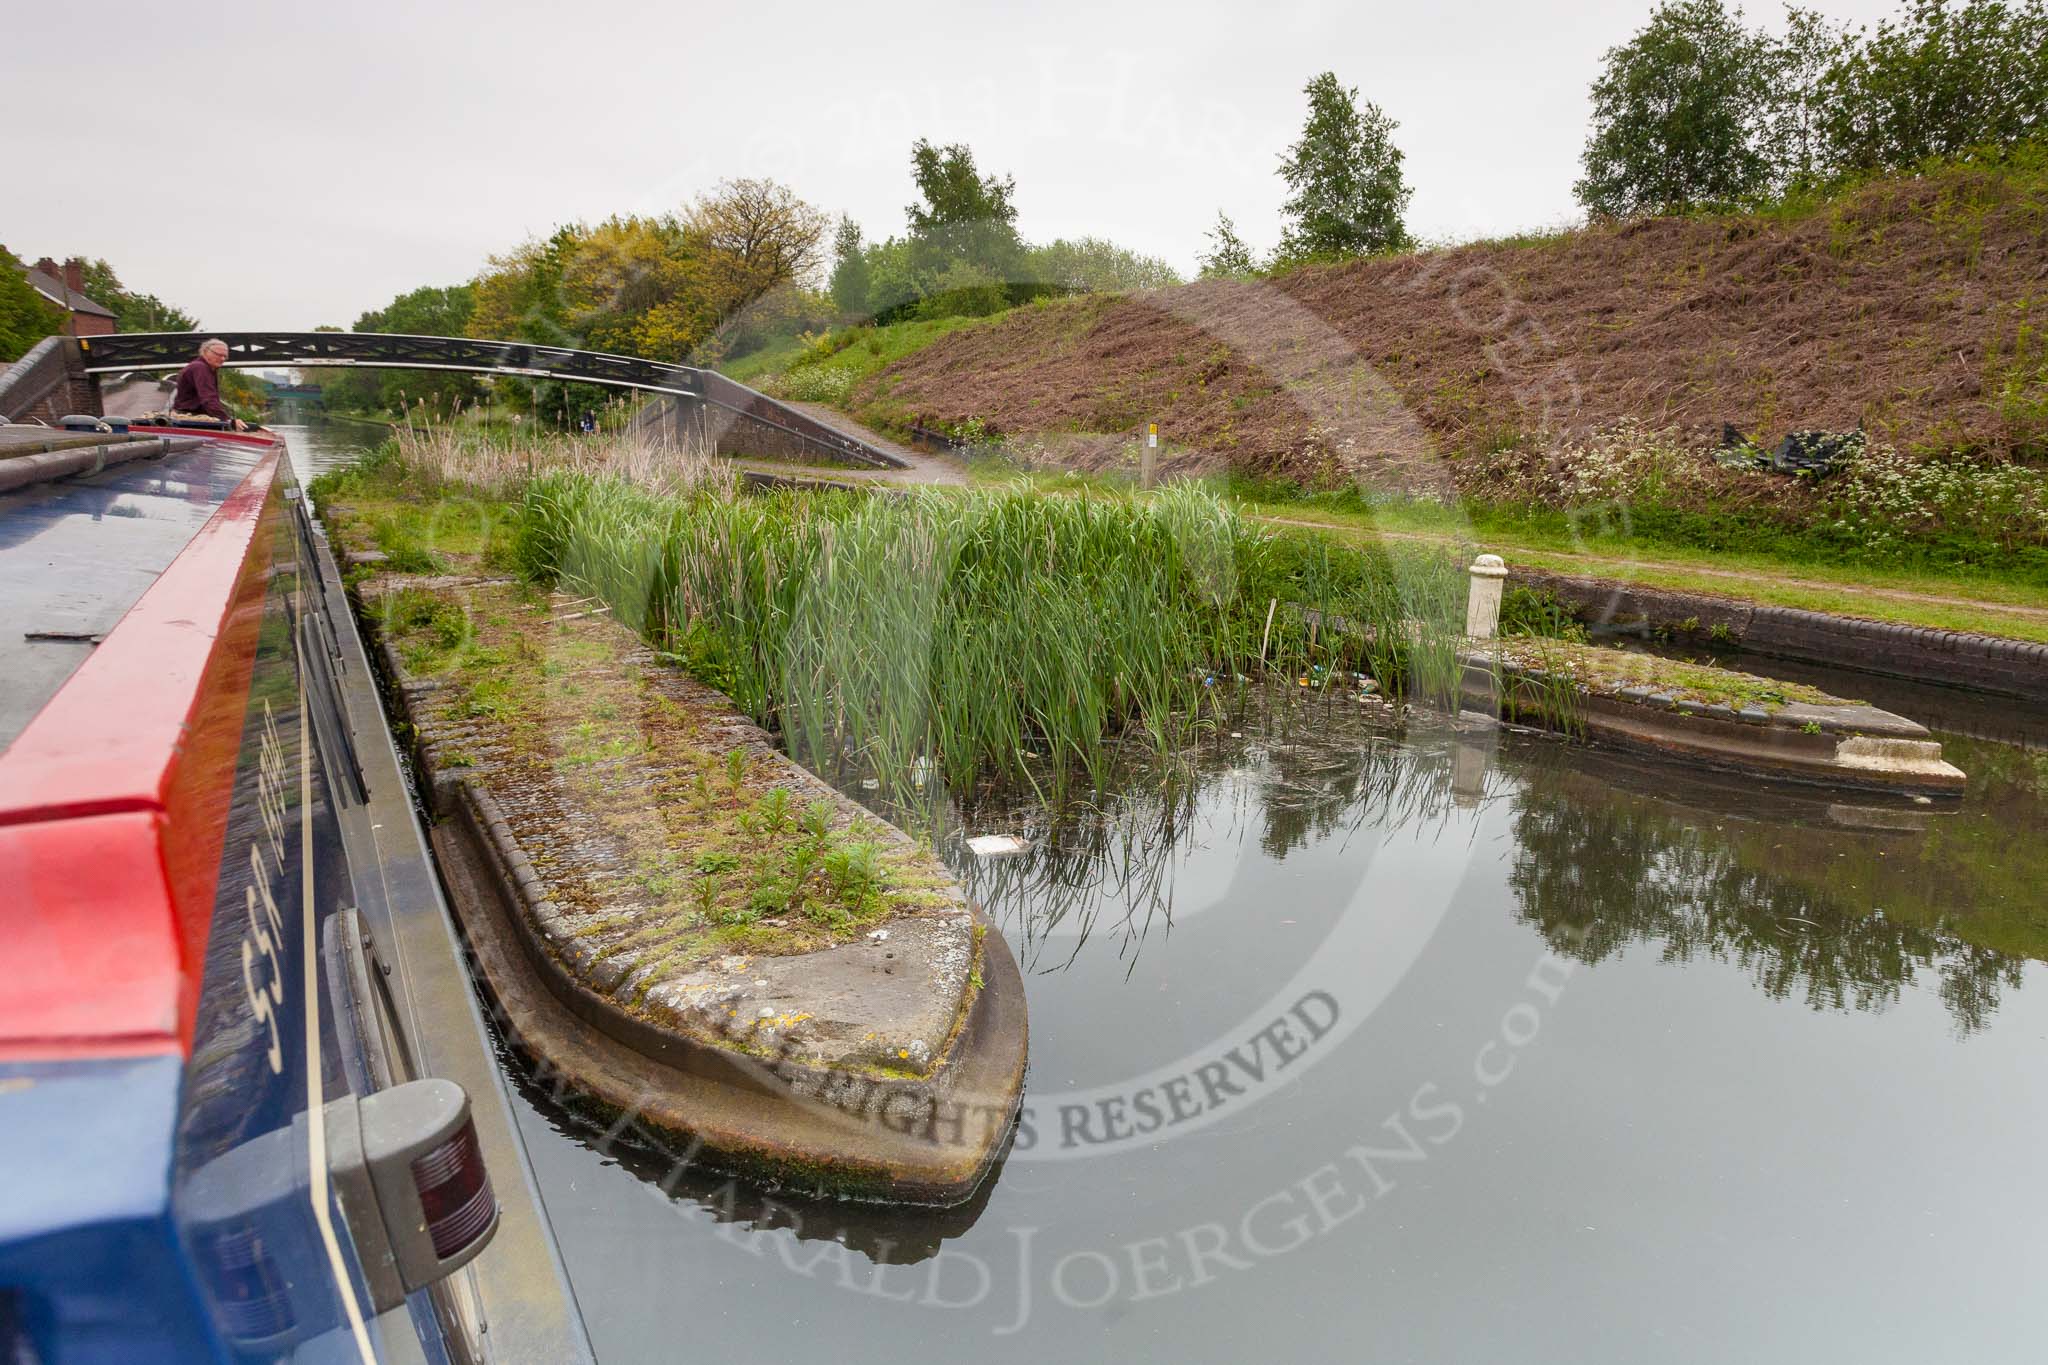 BCN 24h Marathon Challenge 2015: "Felonious Mongoose" passing Winson Green toll island on the BCN Main Line, behind is Winson Green Roving Bridge.
Birmingham Canal Navigations,



on 23 May 2015 at 09:50, image #44